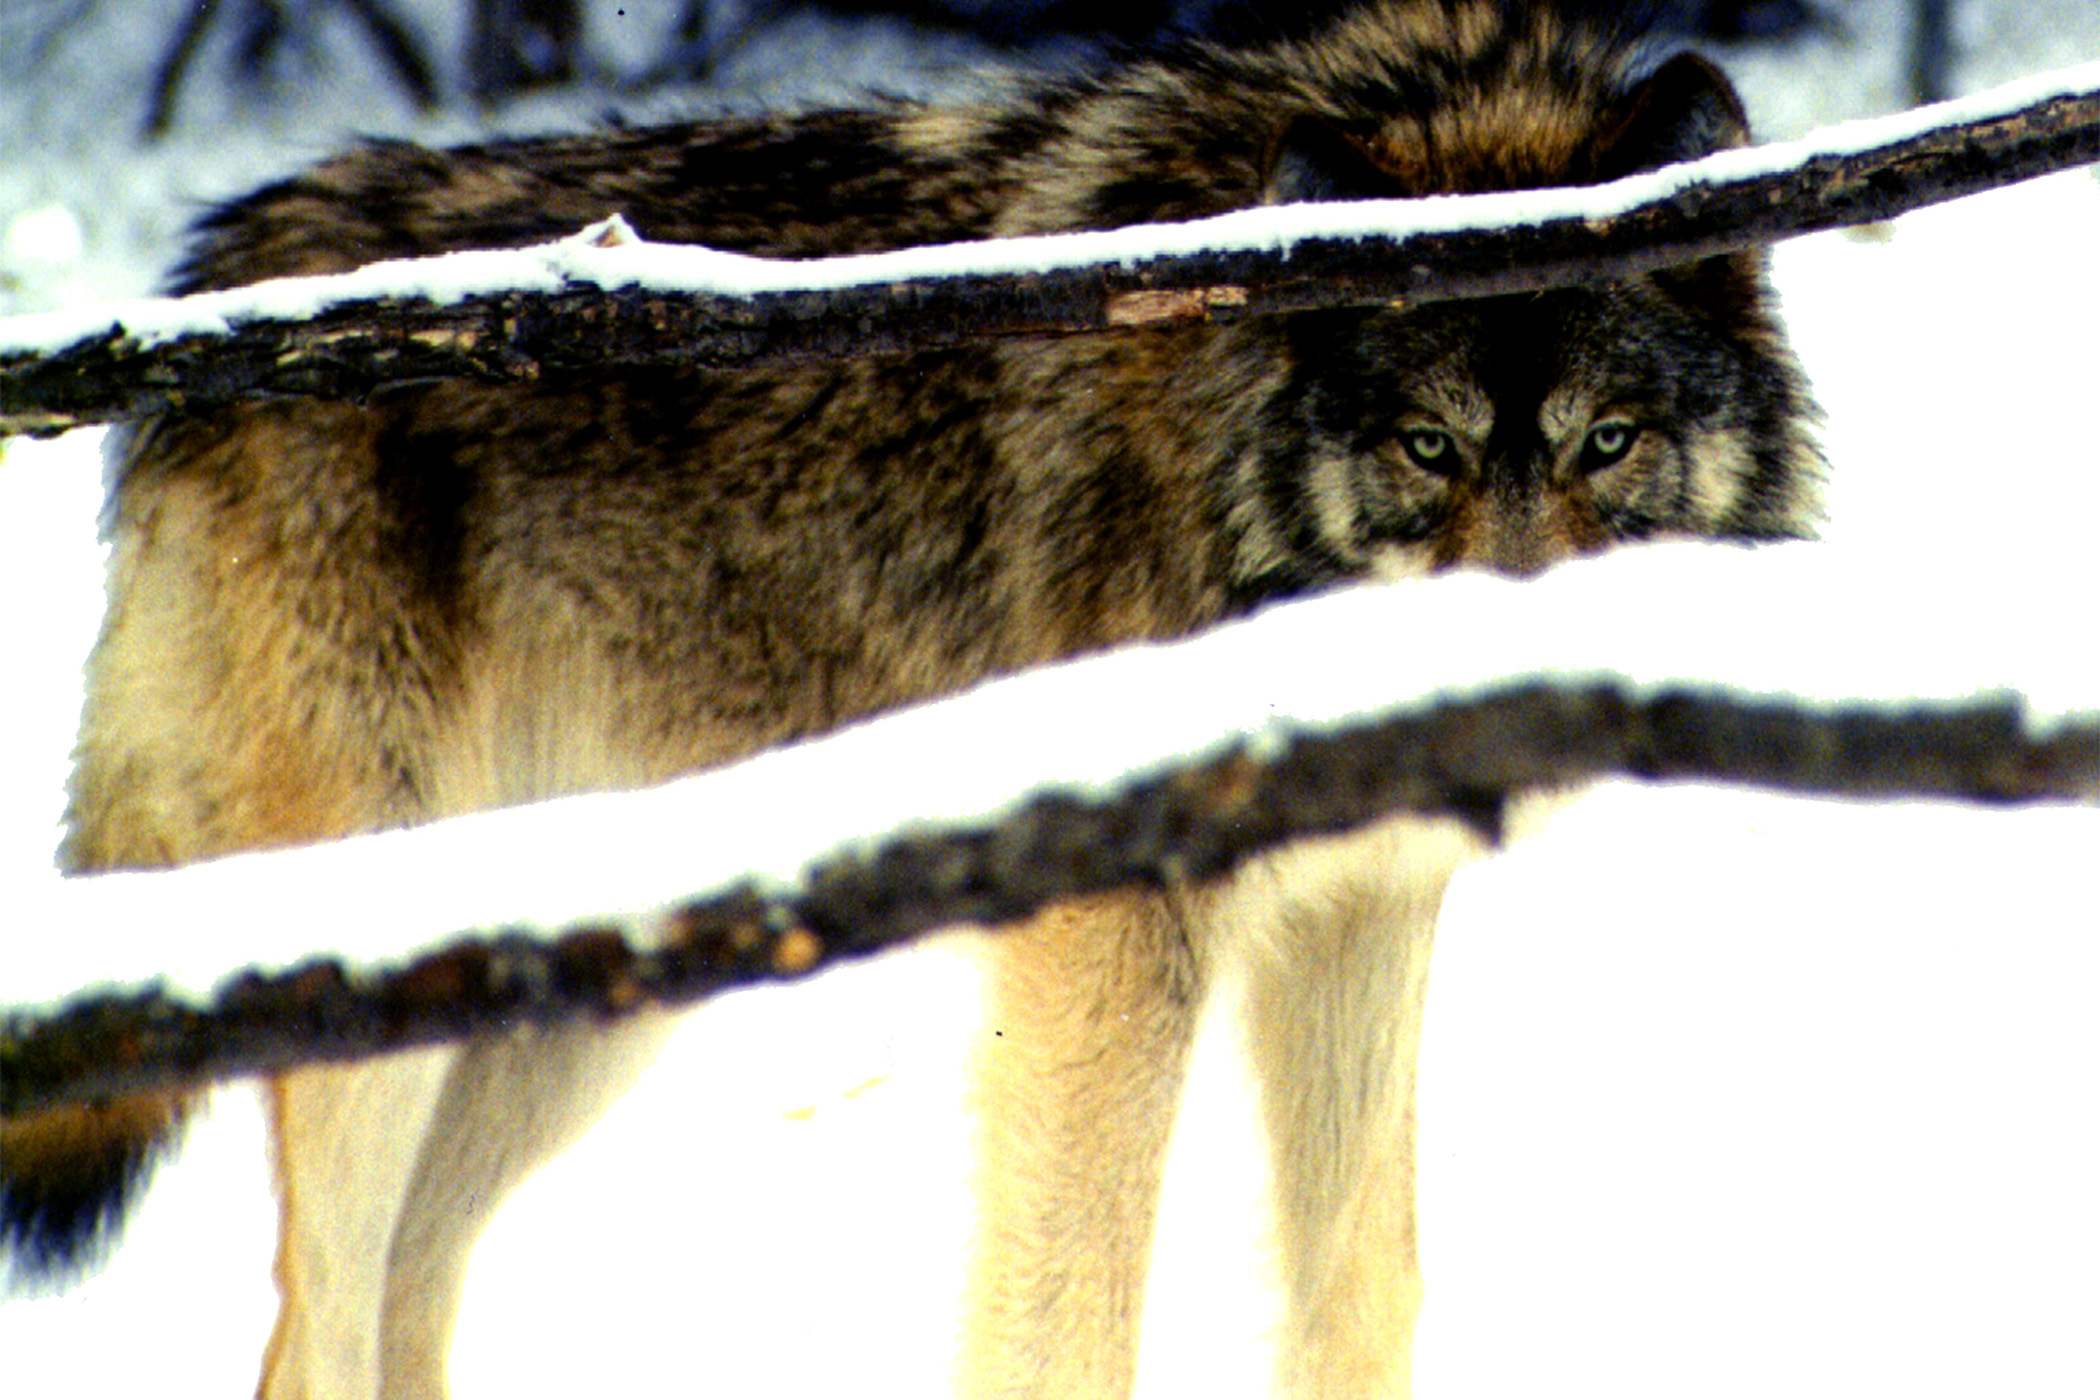 The report indicates that the state's wolf population remains stable despite changes in hunting and trapping regulations.